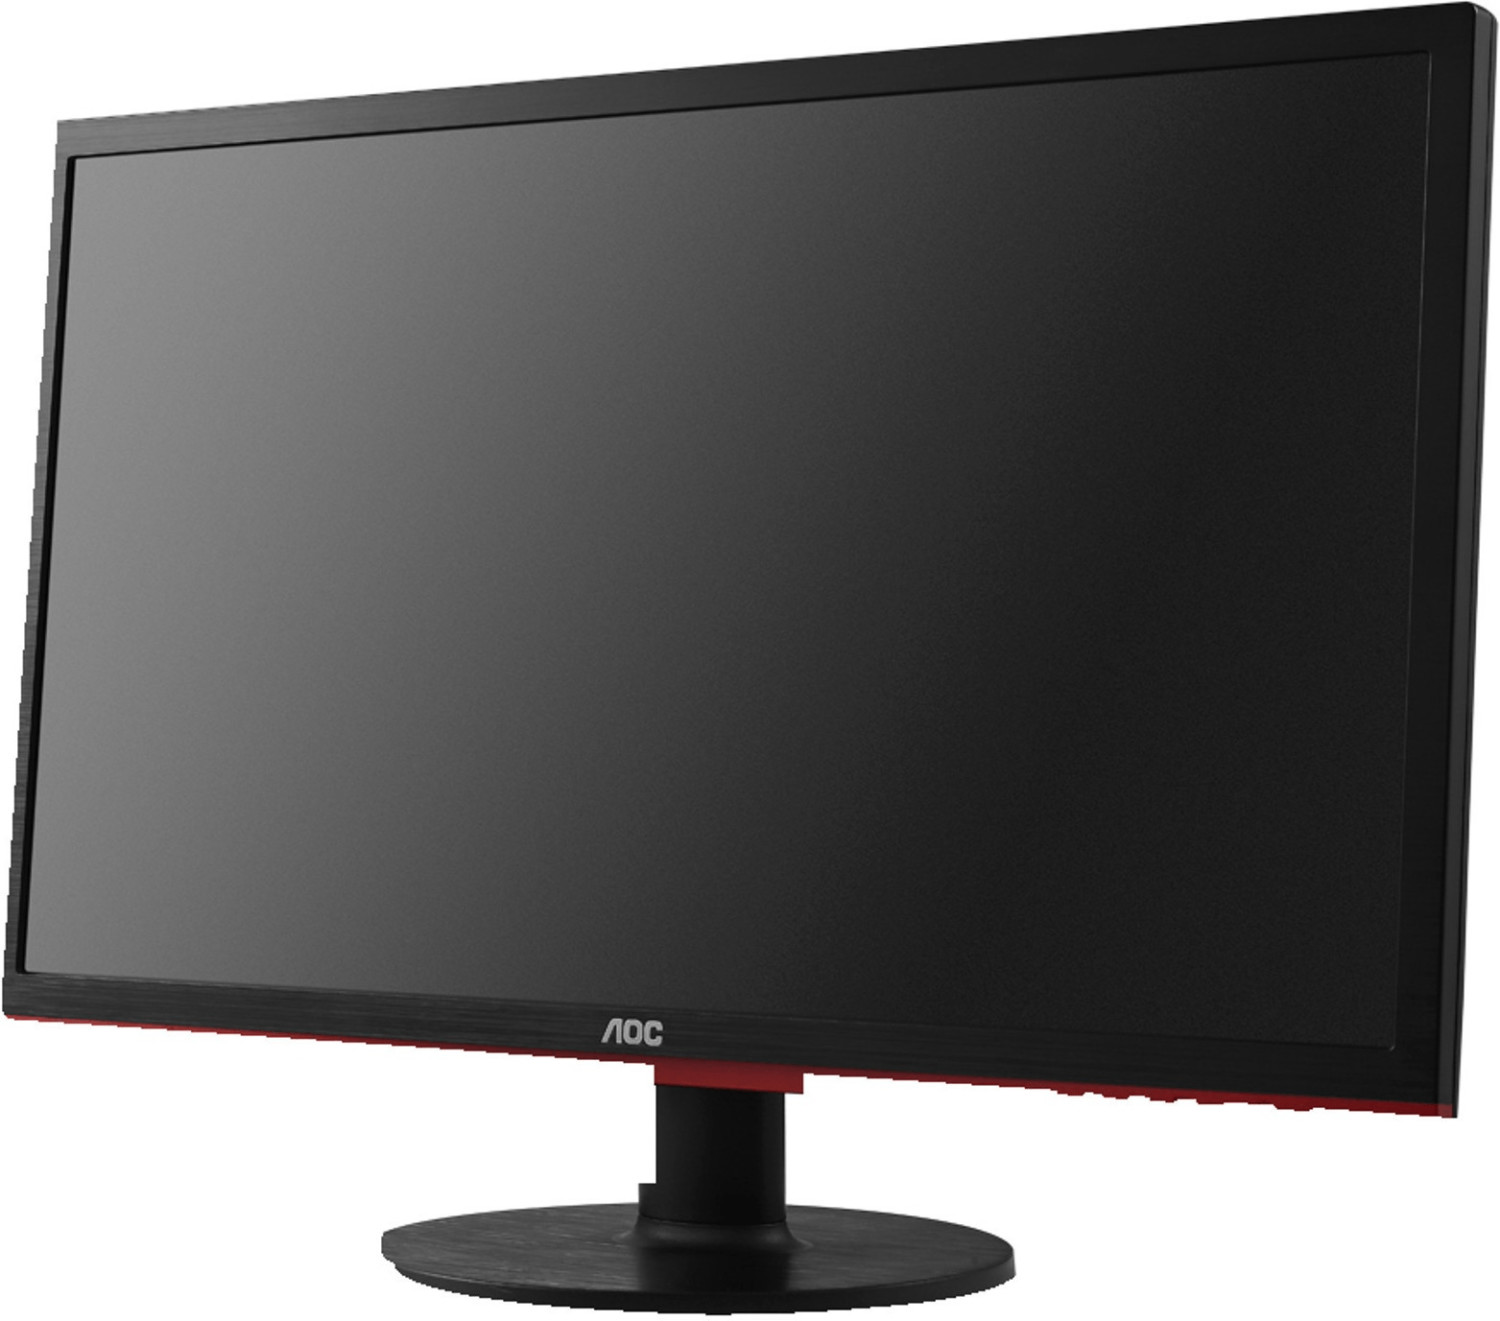 Buy AOC G2460VQ6 from £134.99 (Today) – Best Deals on idealo.co.uk